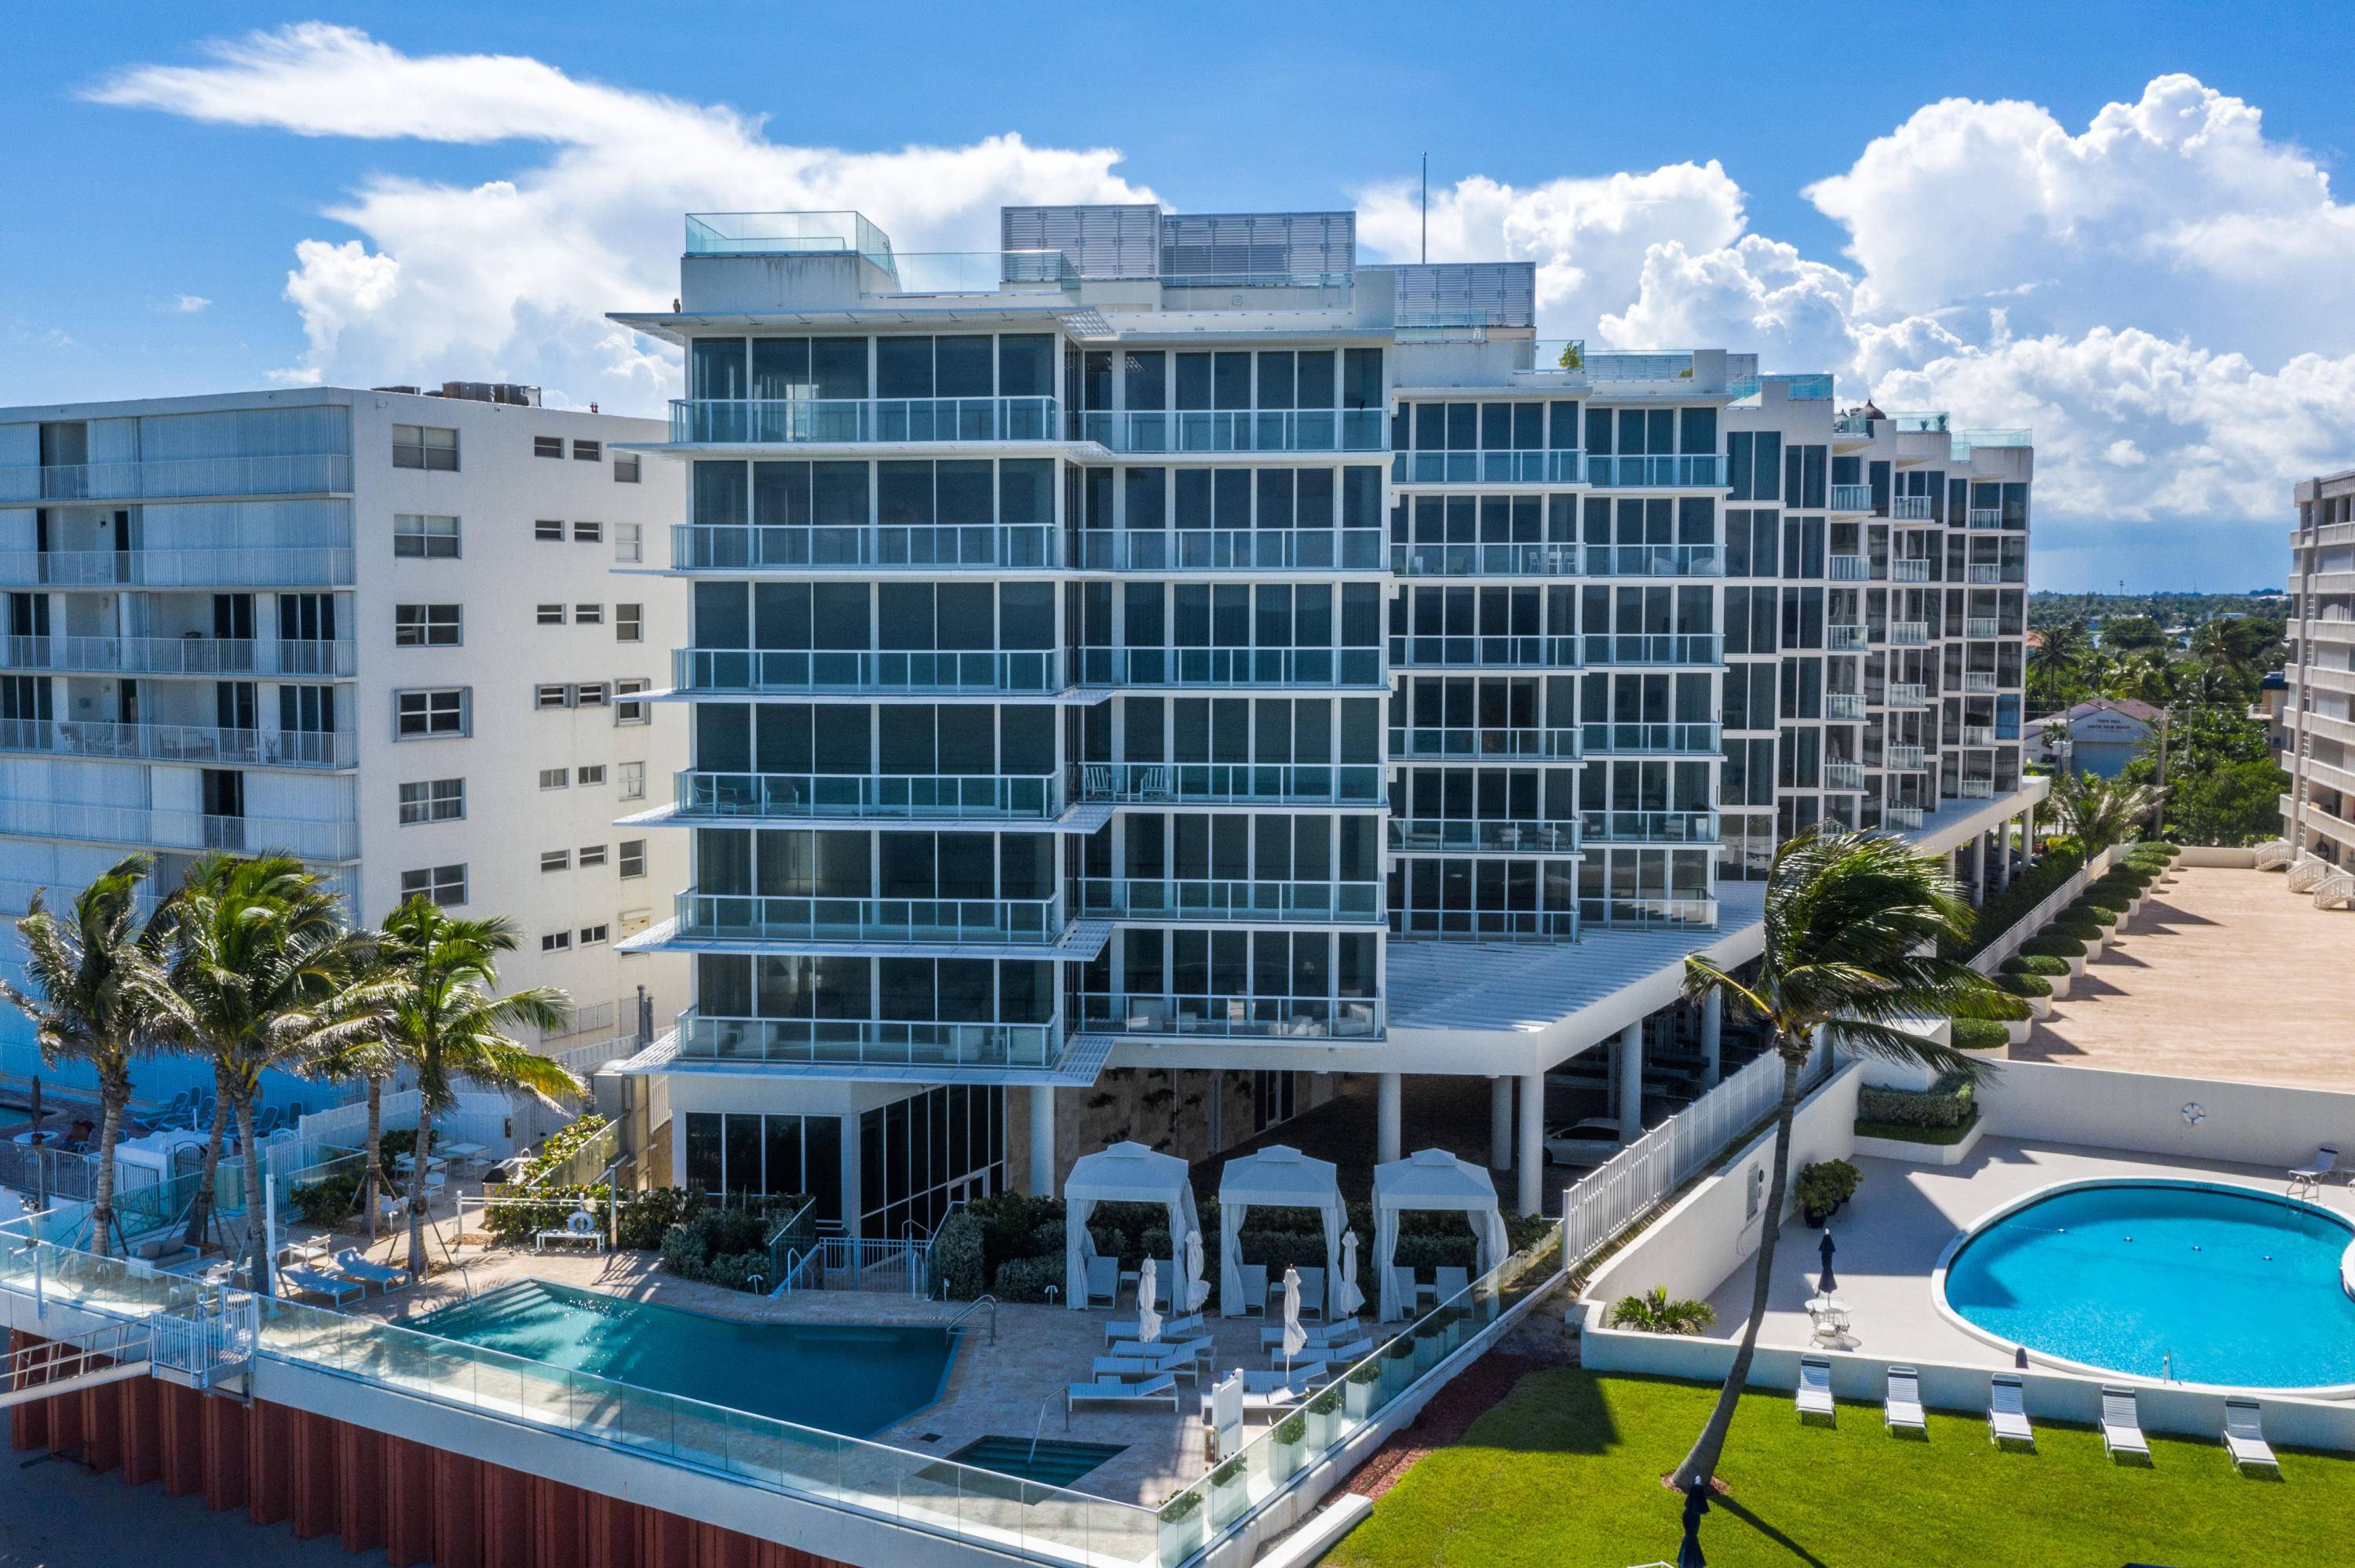 Three 3 luxury oceanfront residences remaining in this modern and classic building.